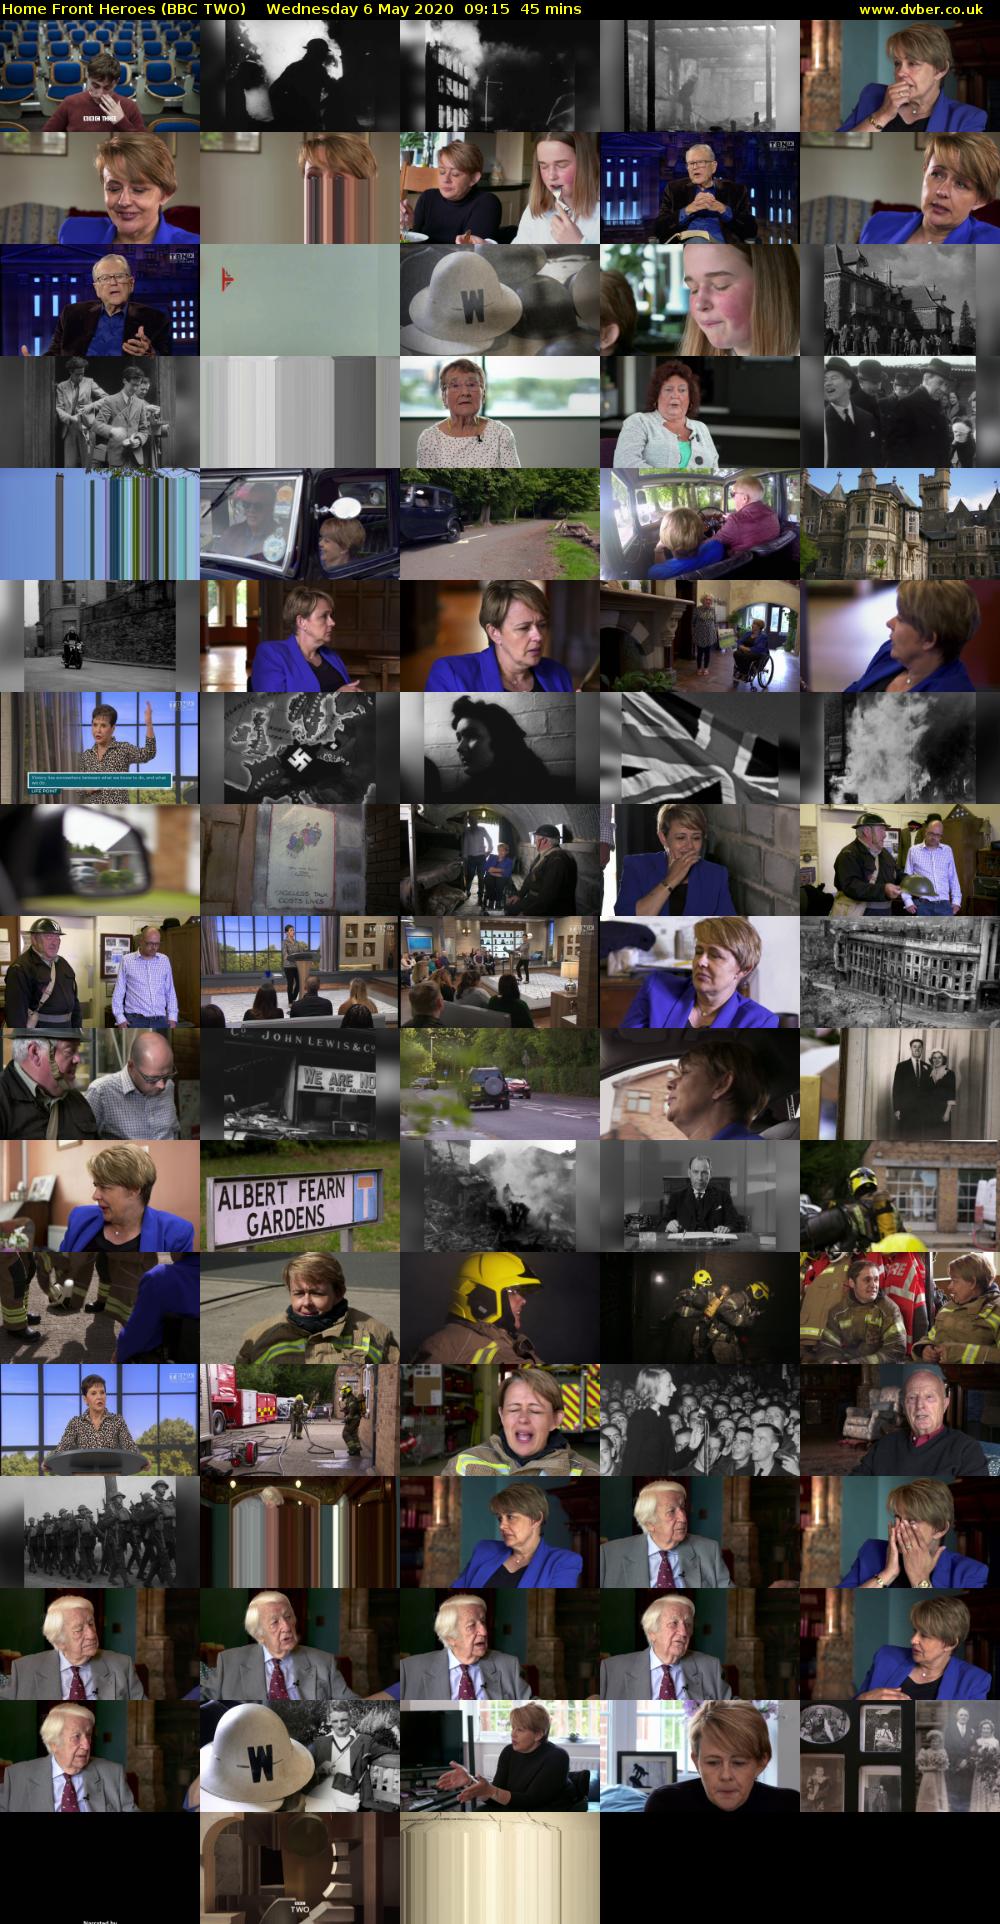 Home Front Heroes (BBC TWO) Wednesday 6 May 2020 09:15 - 10:00